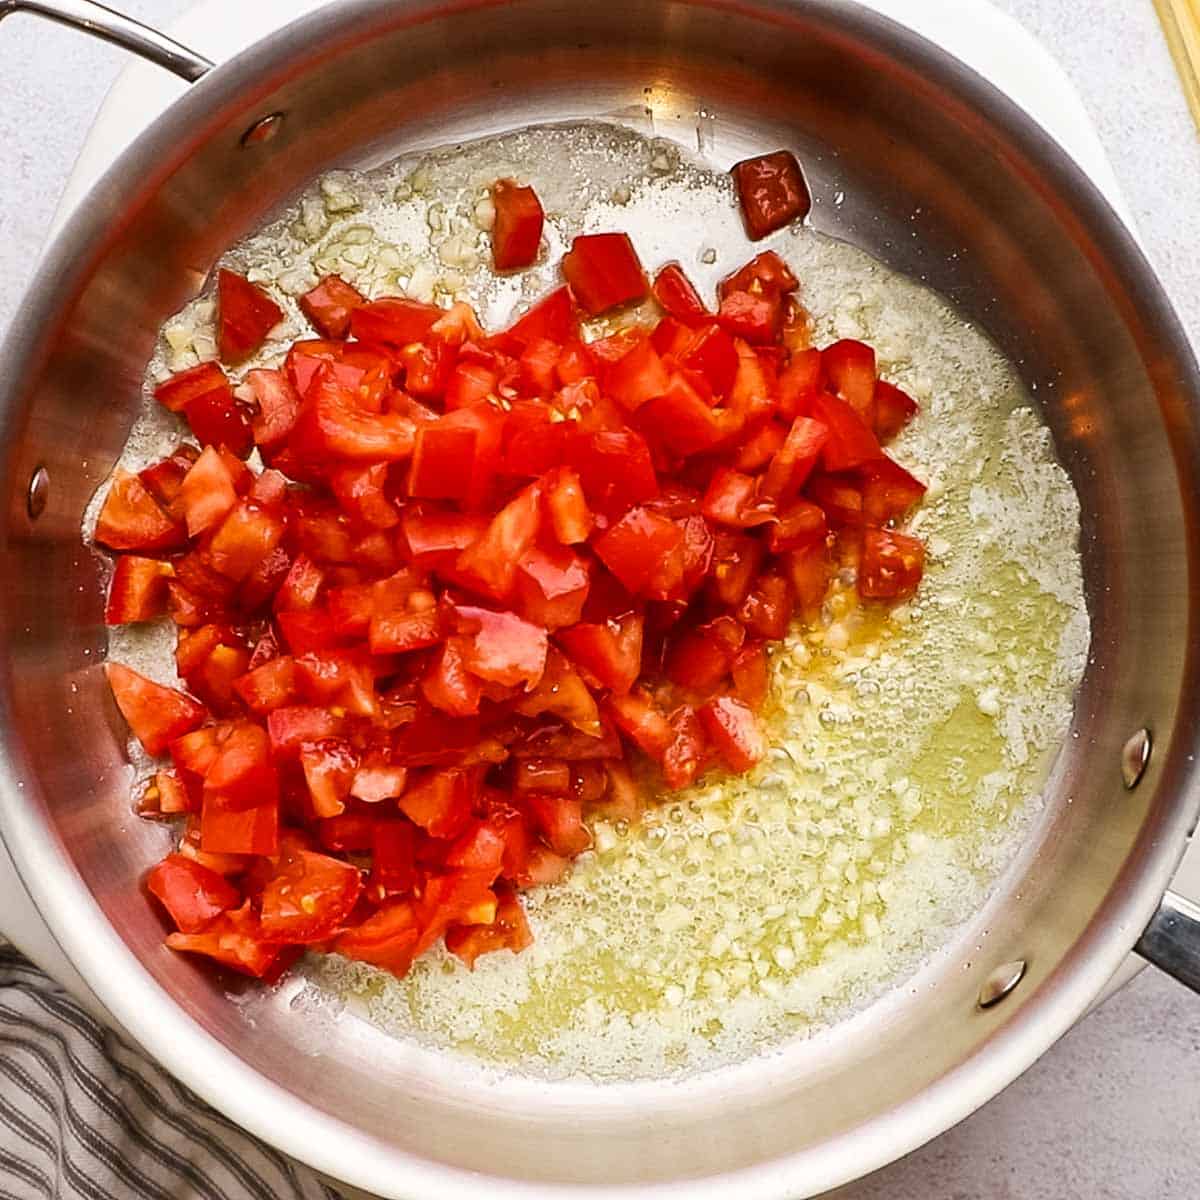 tomatoes added to the butter and garlic in the pot